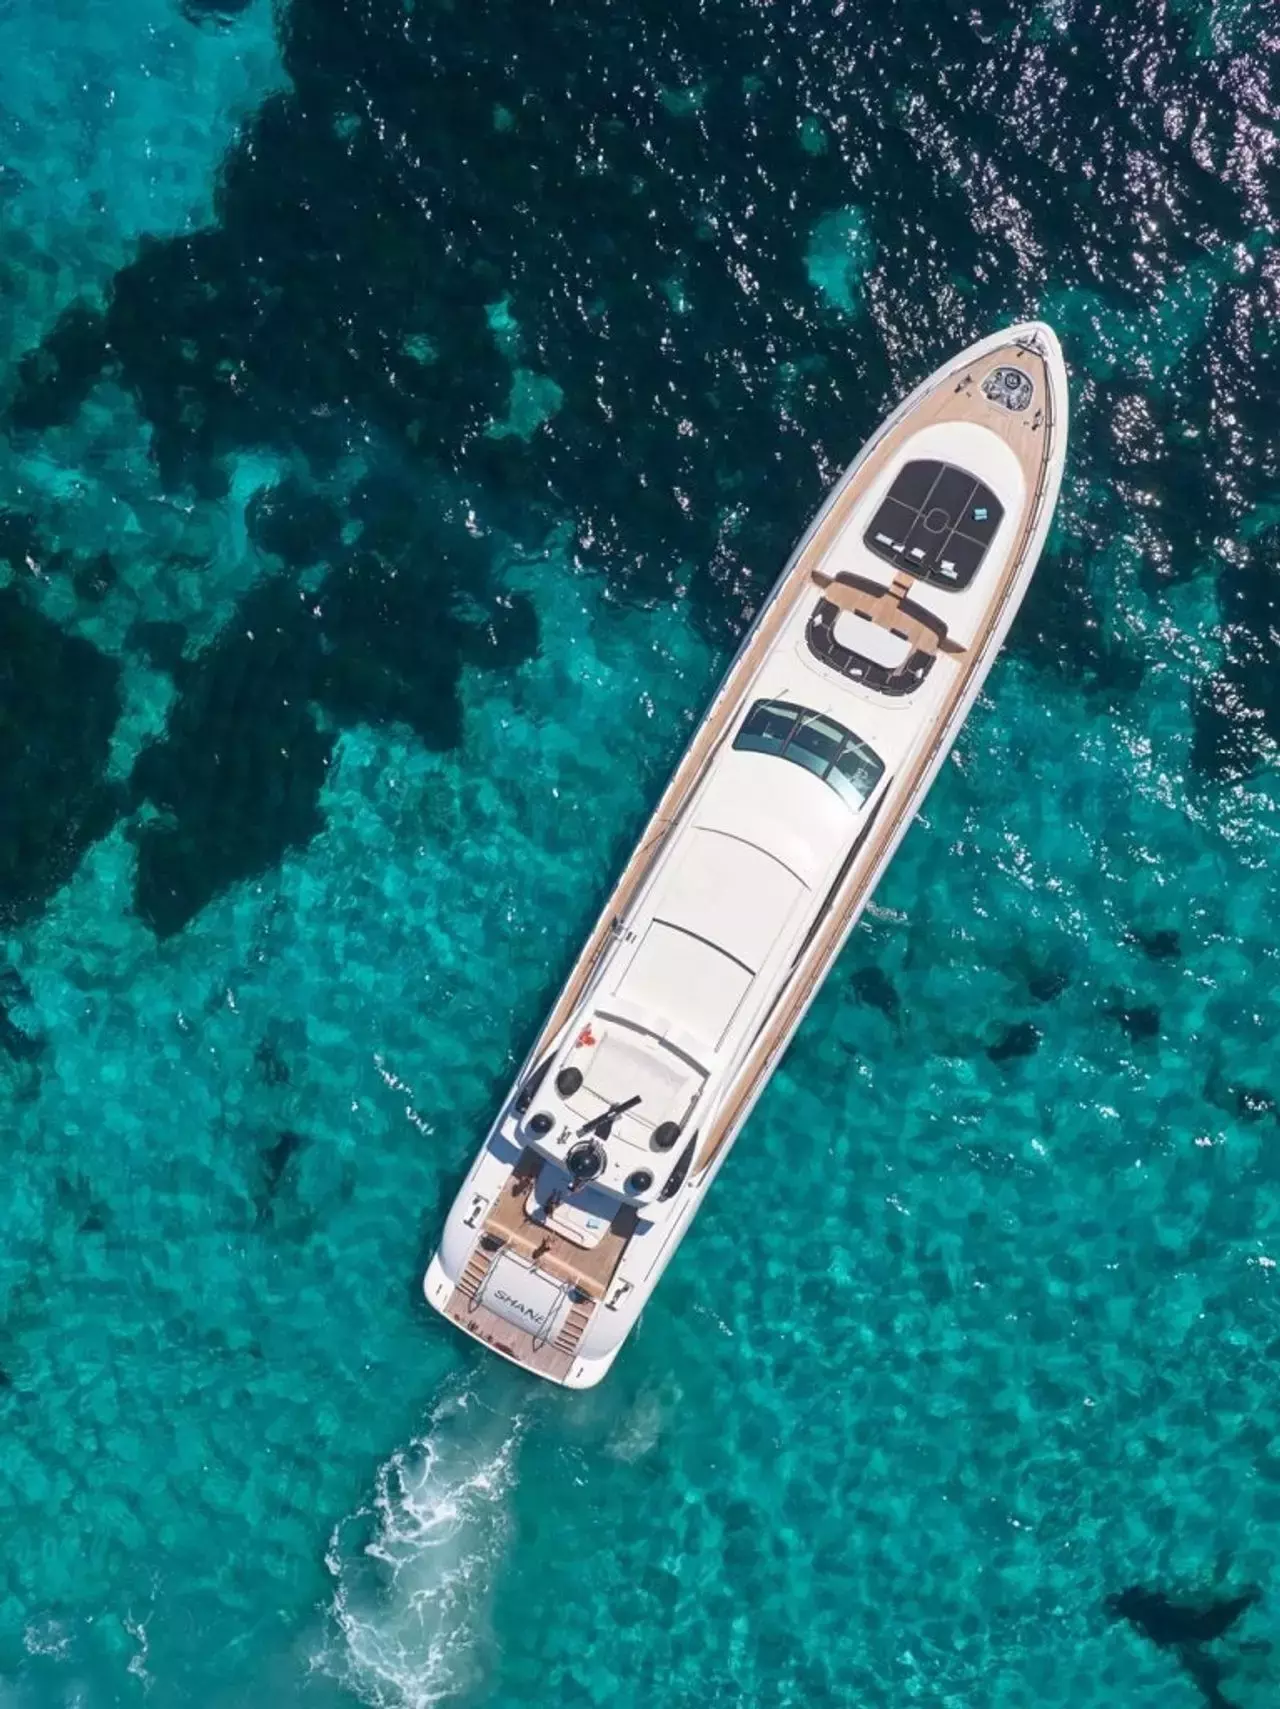 Shane by Mangusta - Special Offer for a private Superyacht Charter in Menorca with a crew